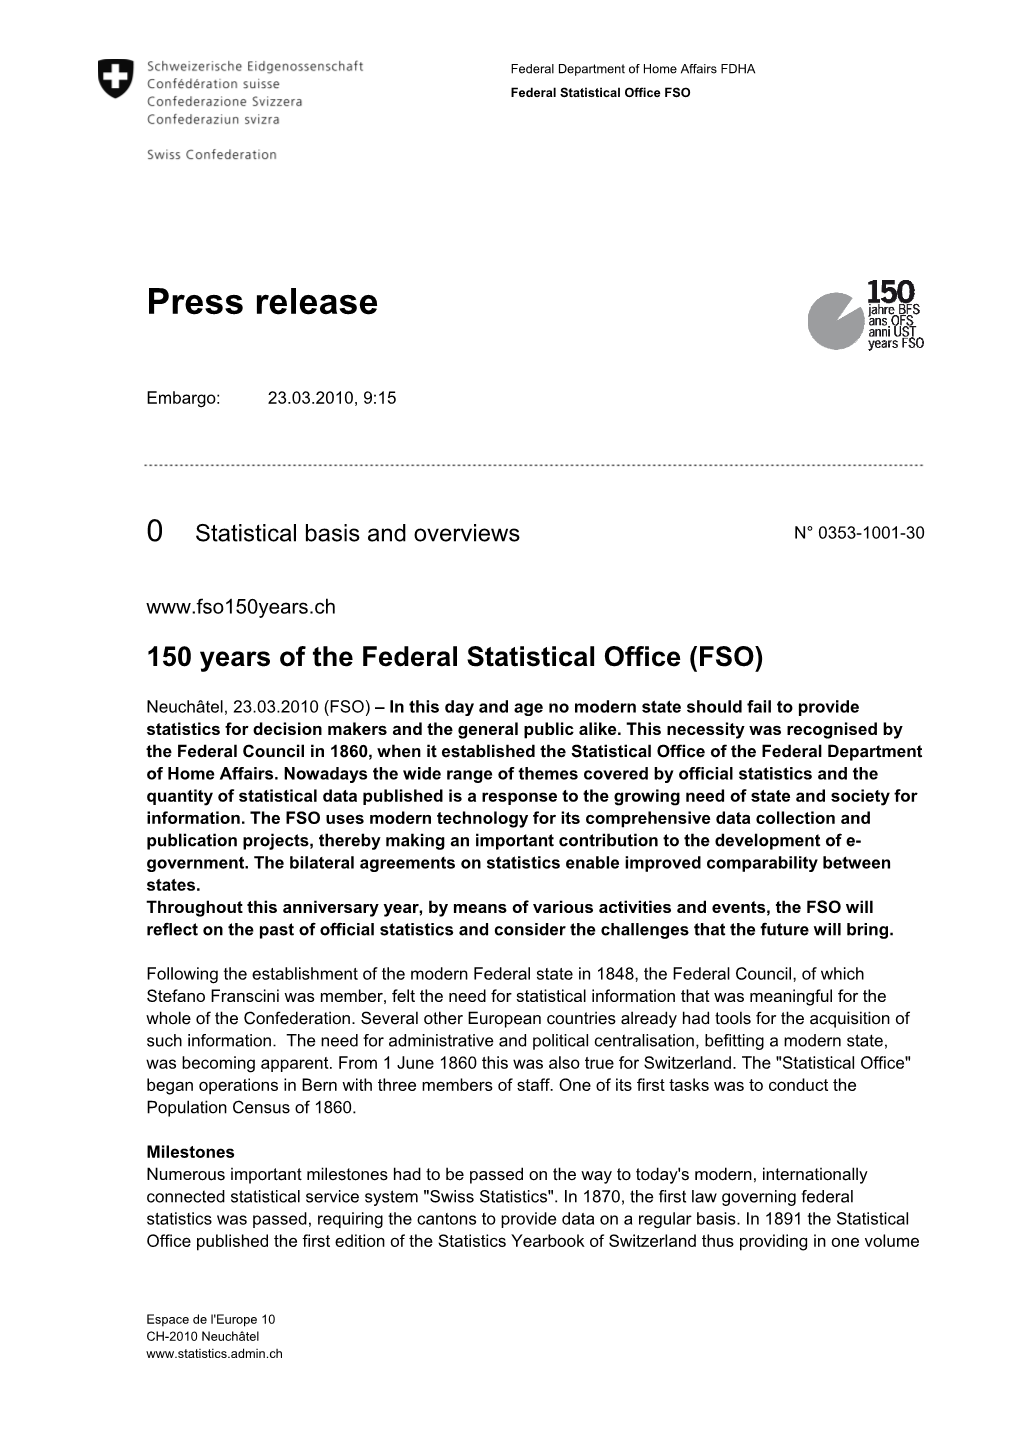 Press Release: 150 Years of the Federal Statistical Office